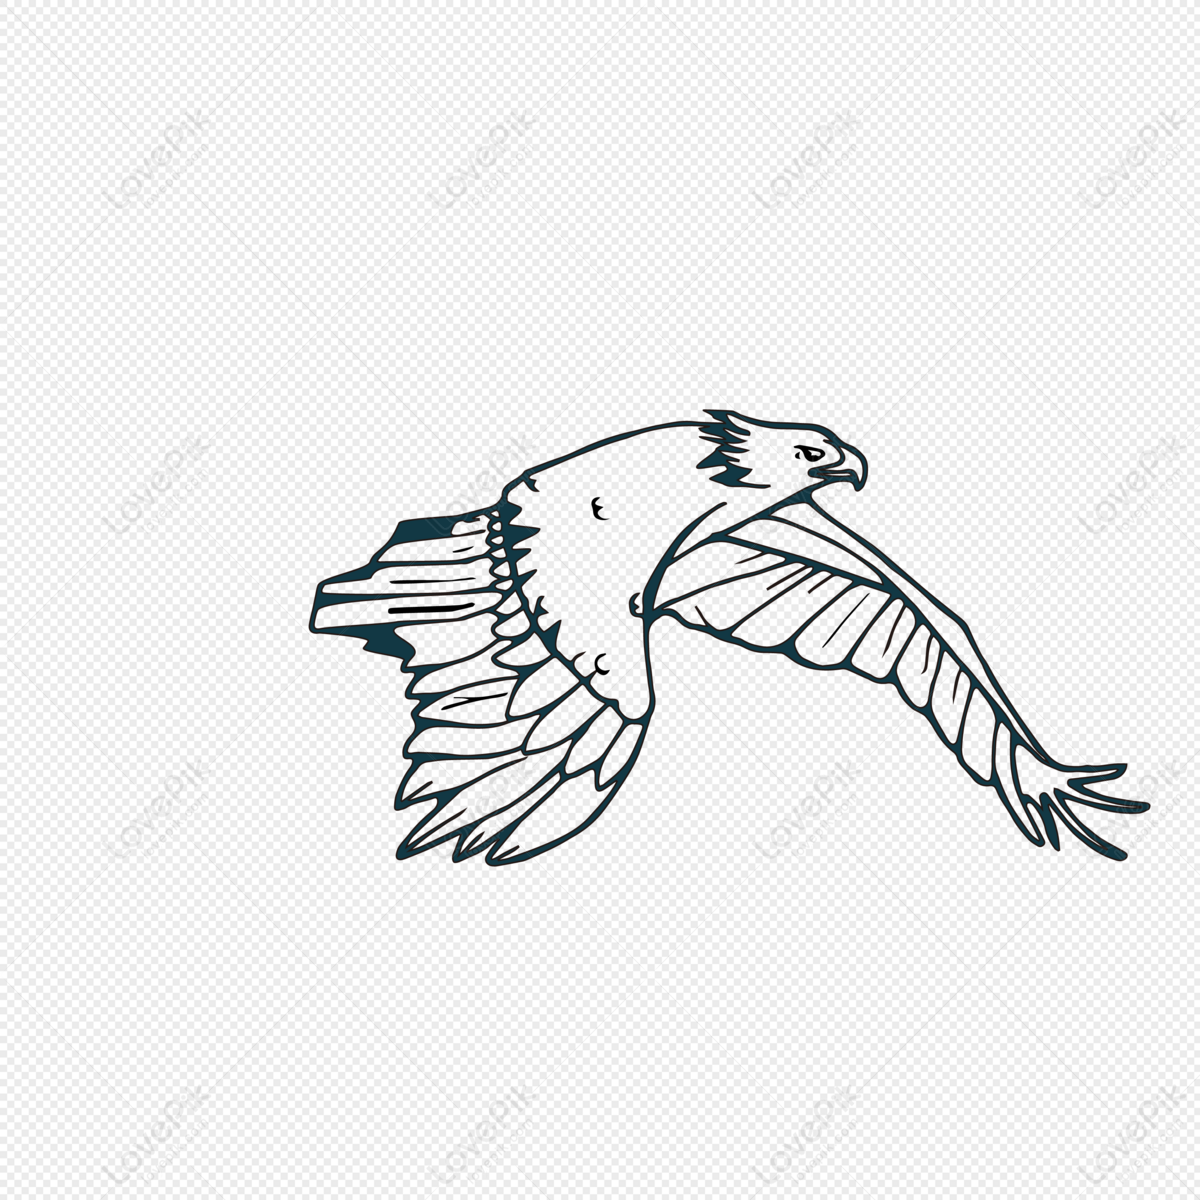 Animal Cartoon Creative Eagle PNG Transparent Background And Clipart Image  For Free Download - Lovepik | 401011550